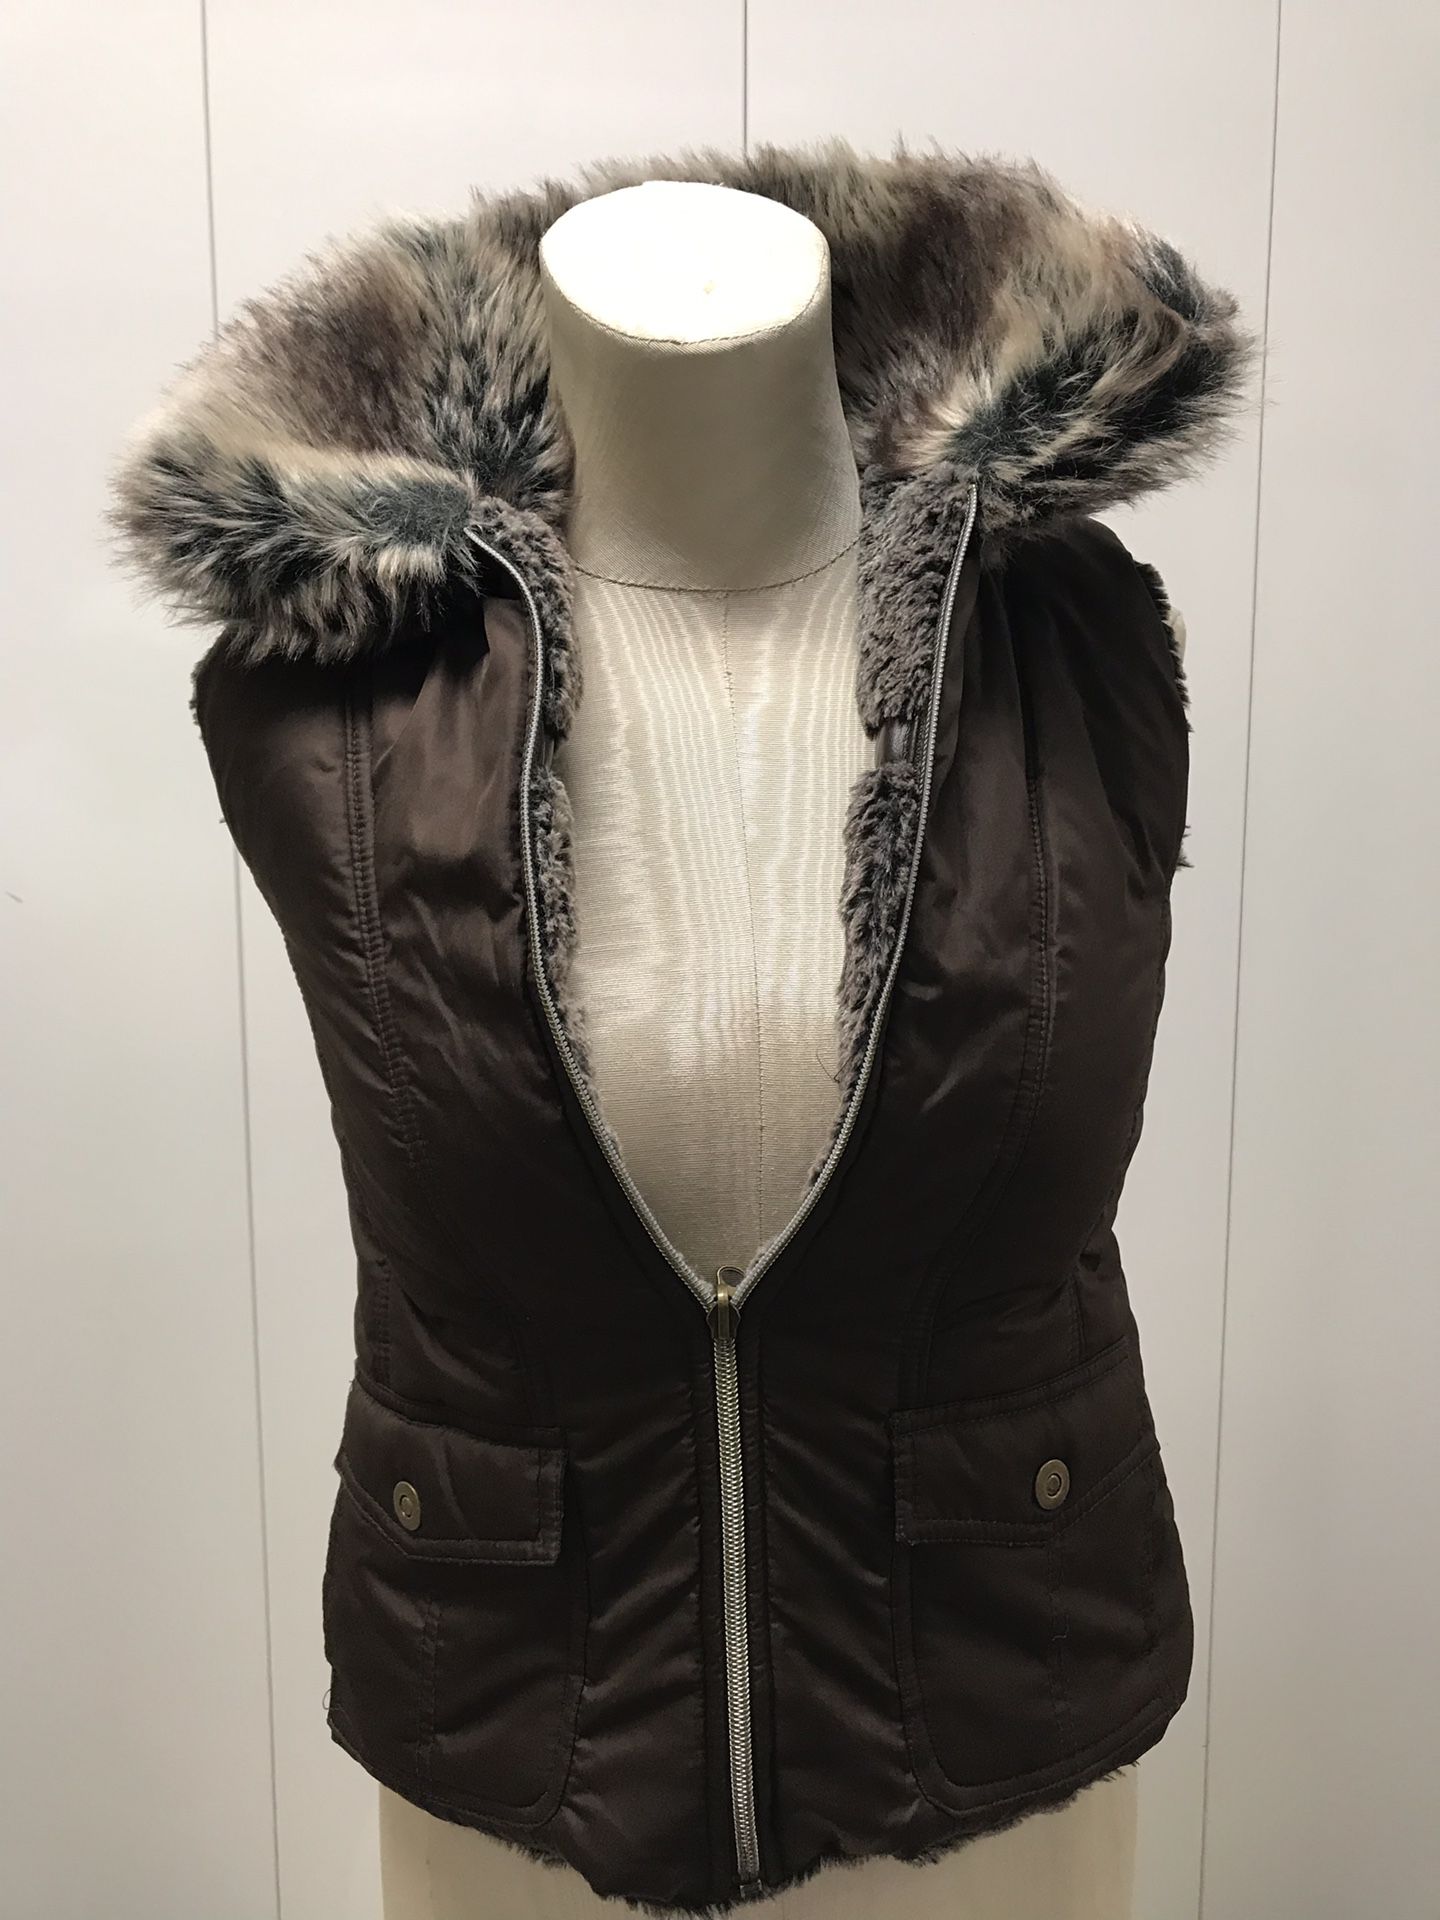 Girls Faux Fur Lined Vest Size Small or Medium